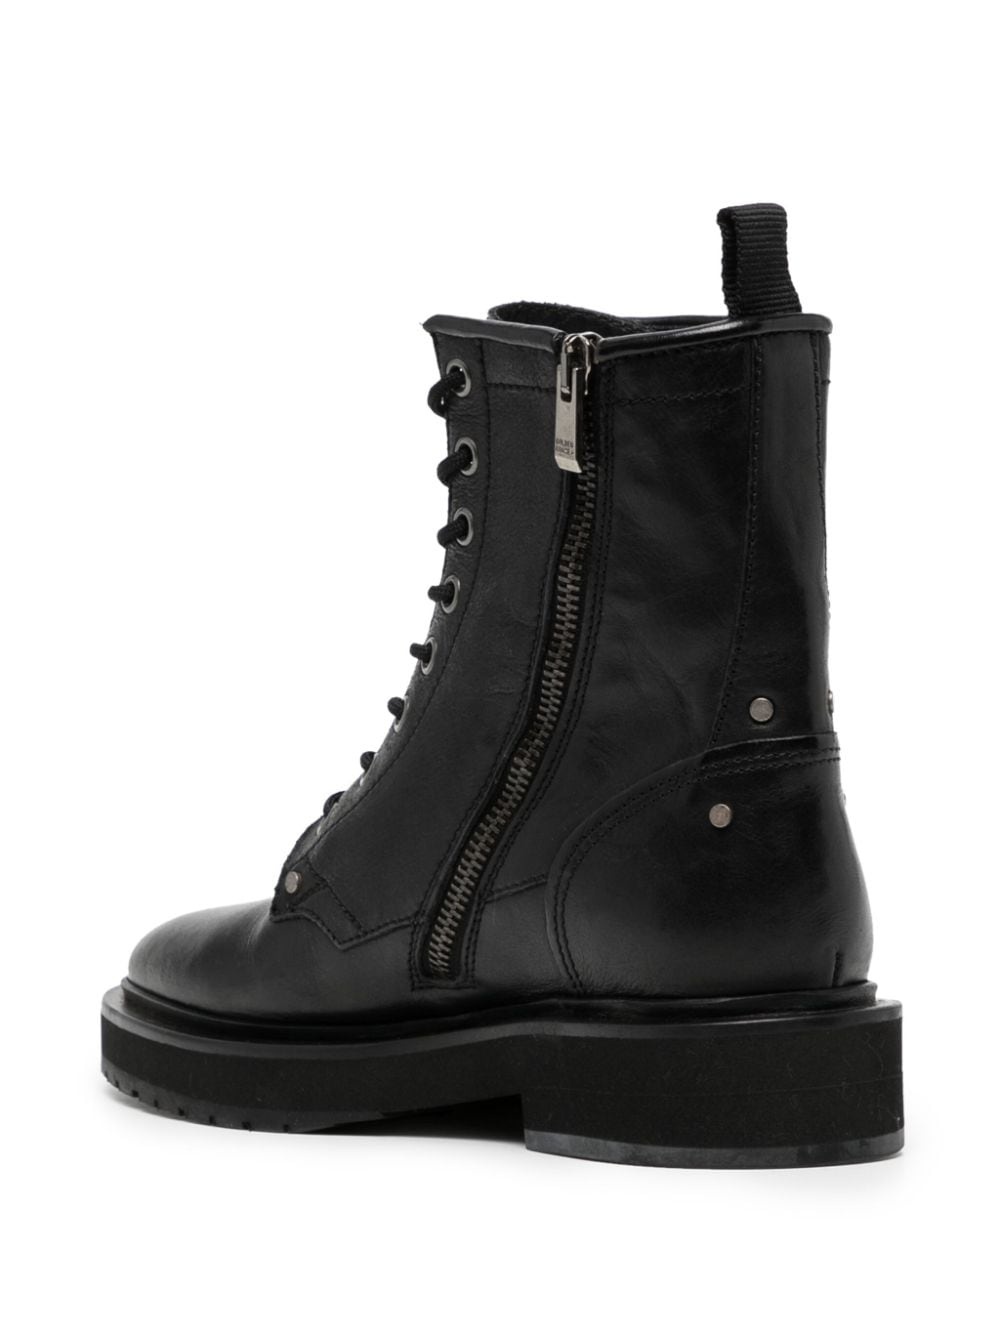 lace-up leather combat boots - 3